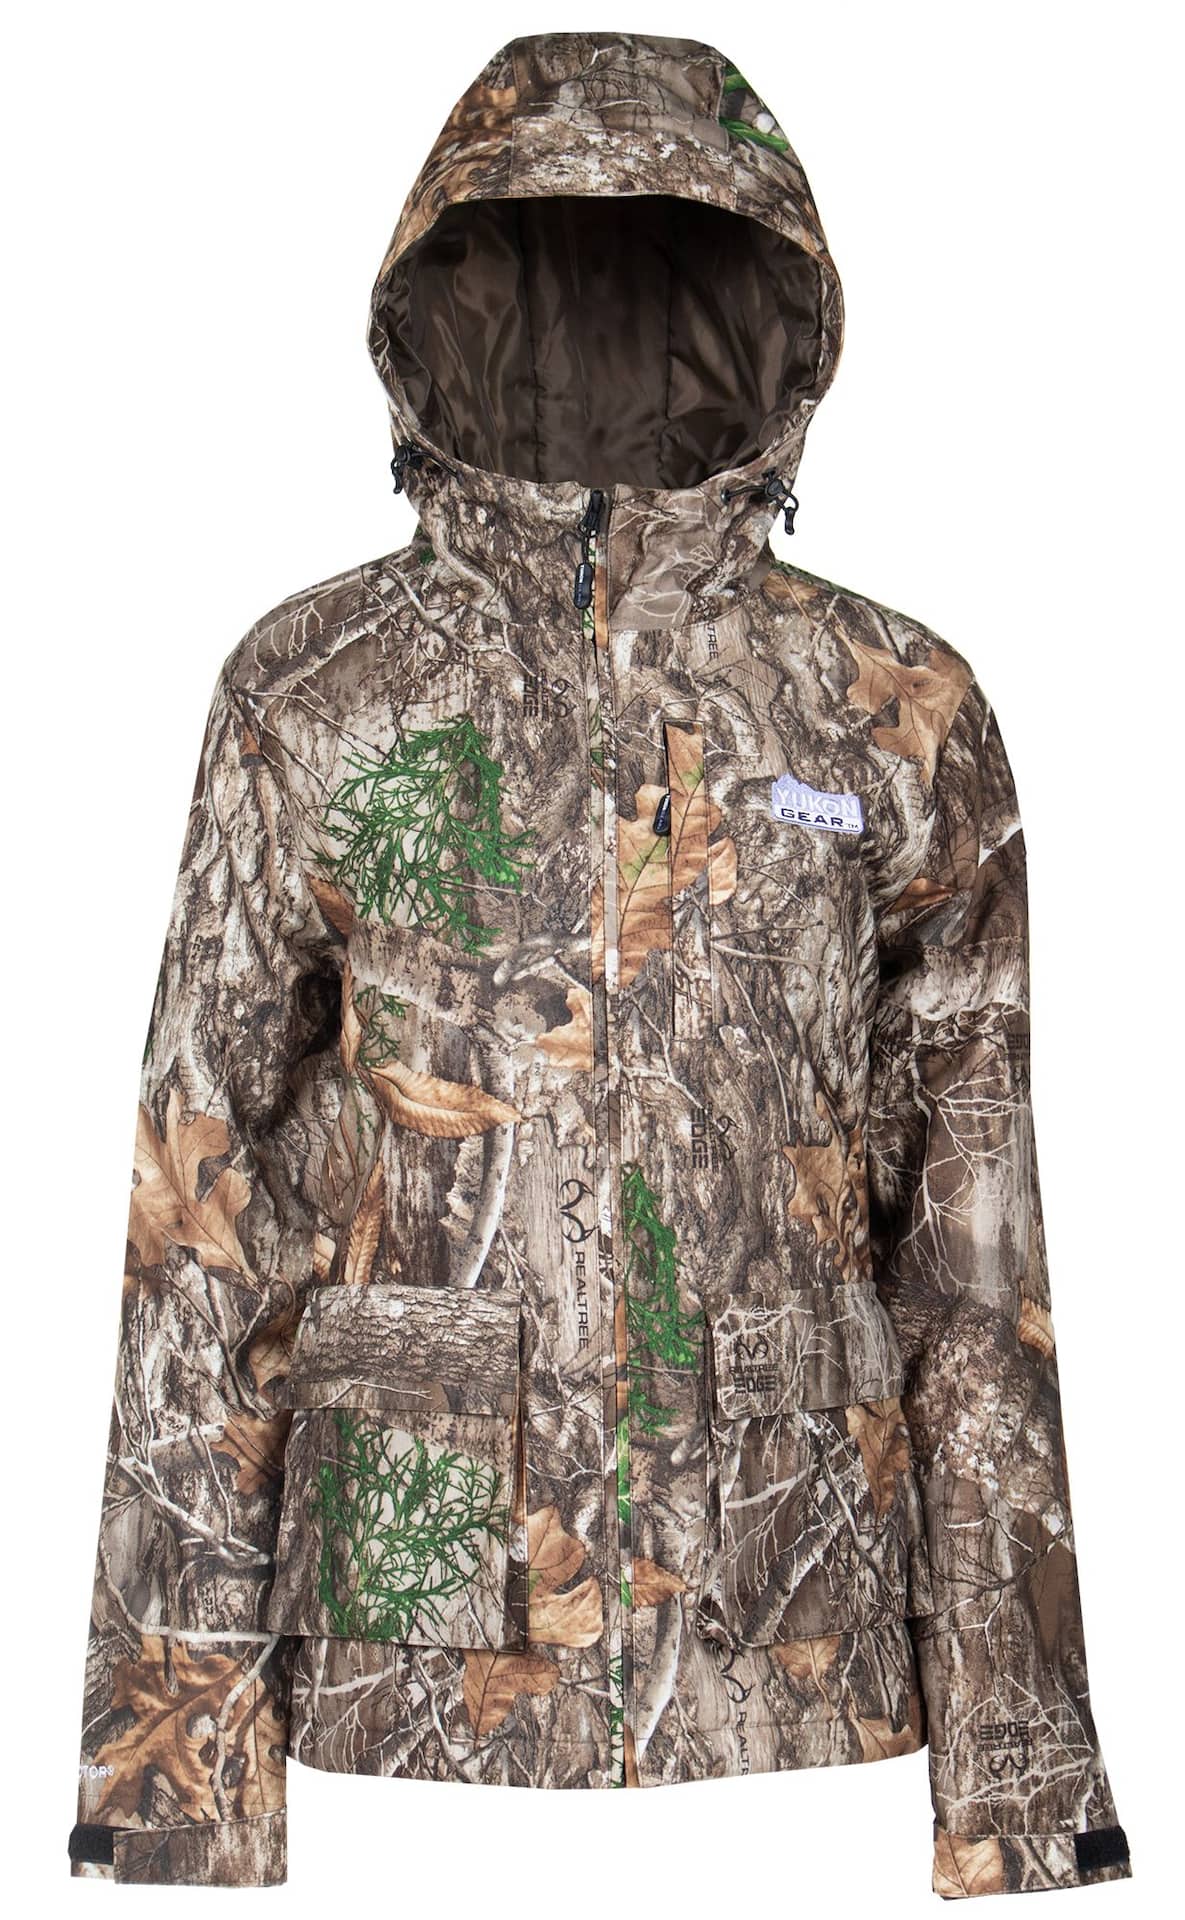 Yukon Gear Women's Insulated Water-Resistant Windproof Hunting